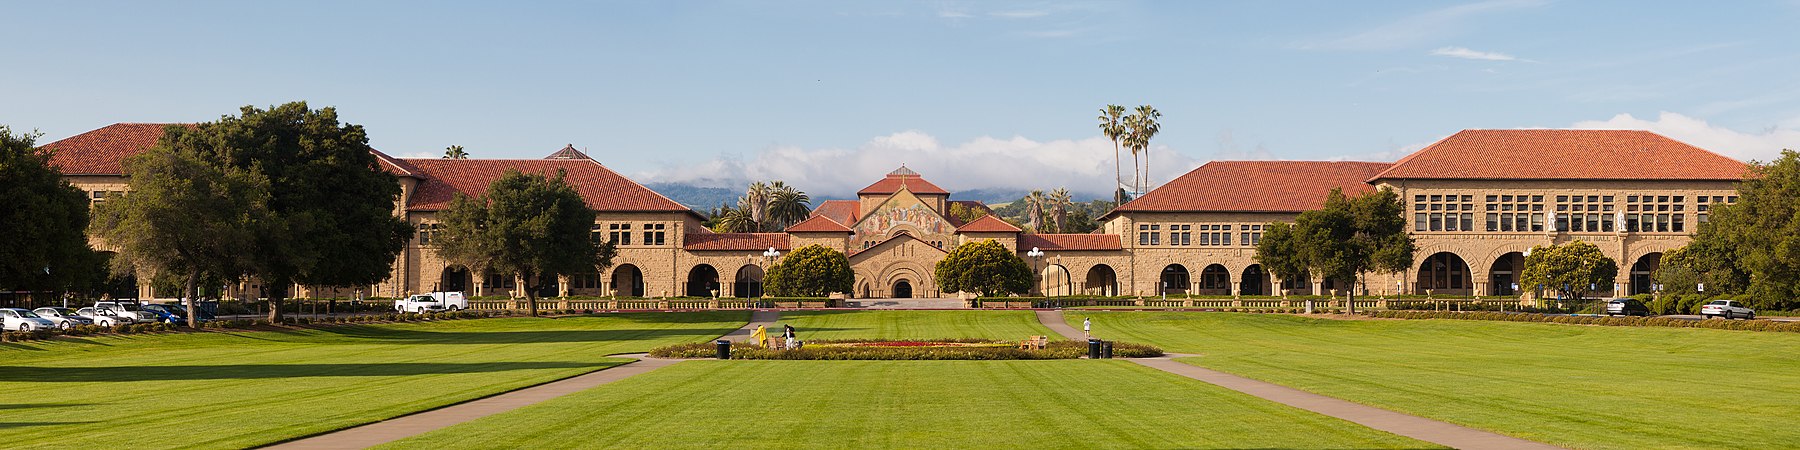 Stanford University, by King of Hearts